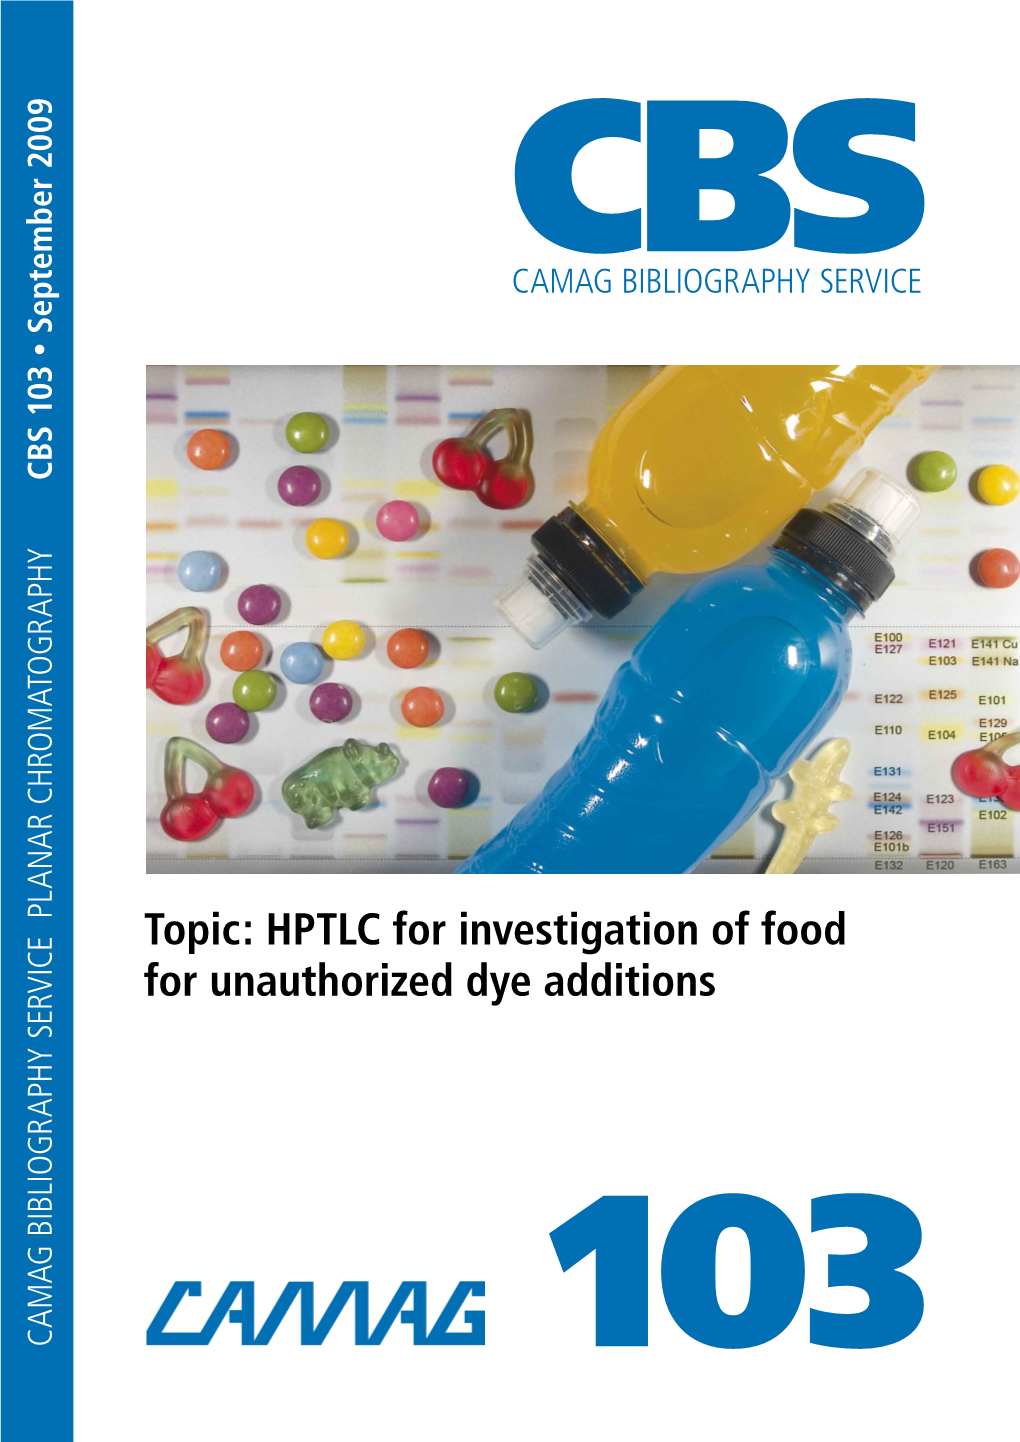 Topic: HPTLC for Investigation of Food for Unauthorized Dye Additions